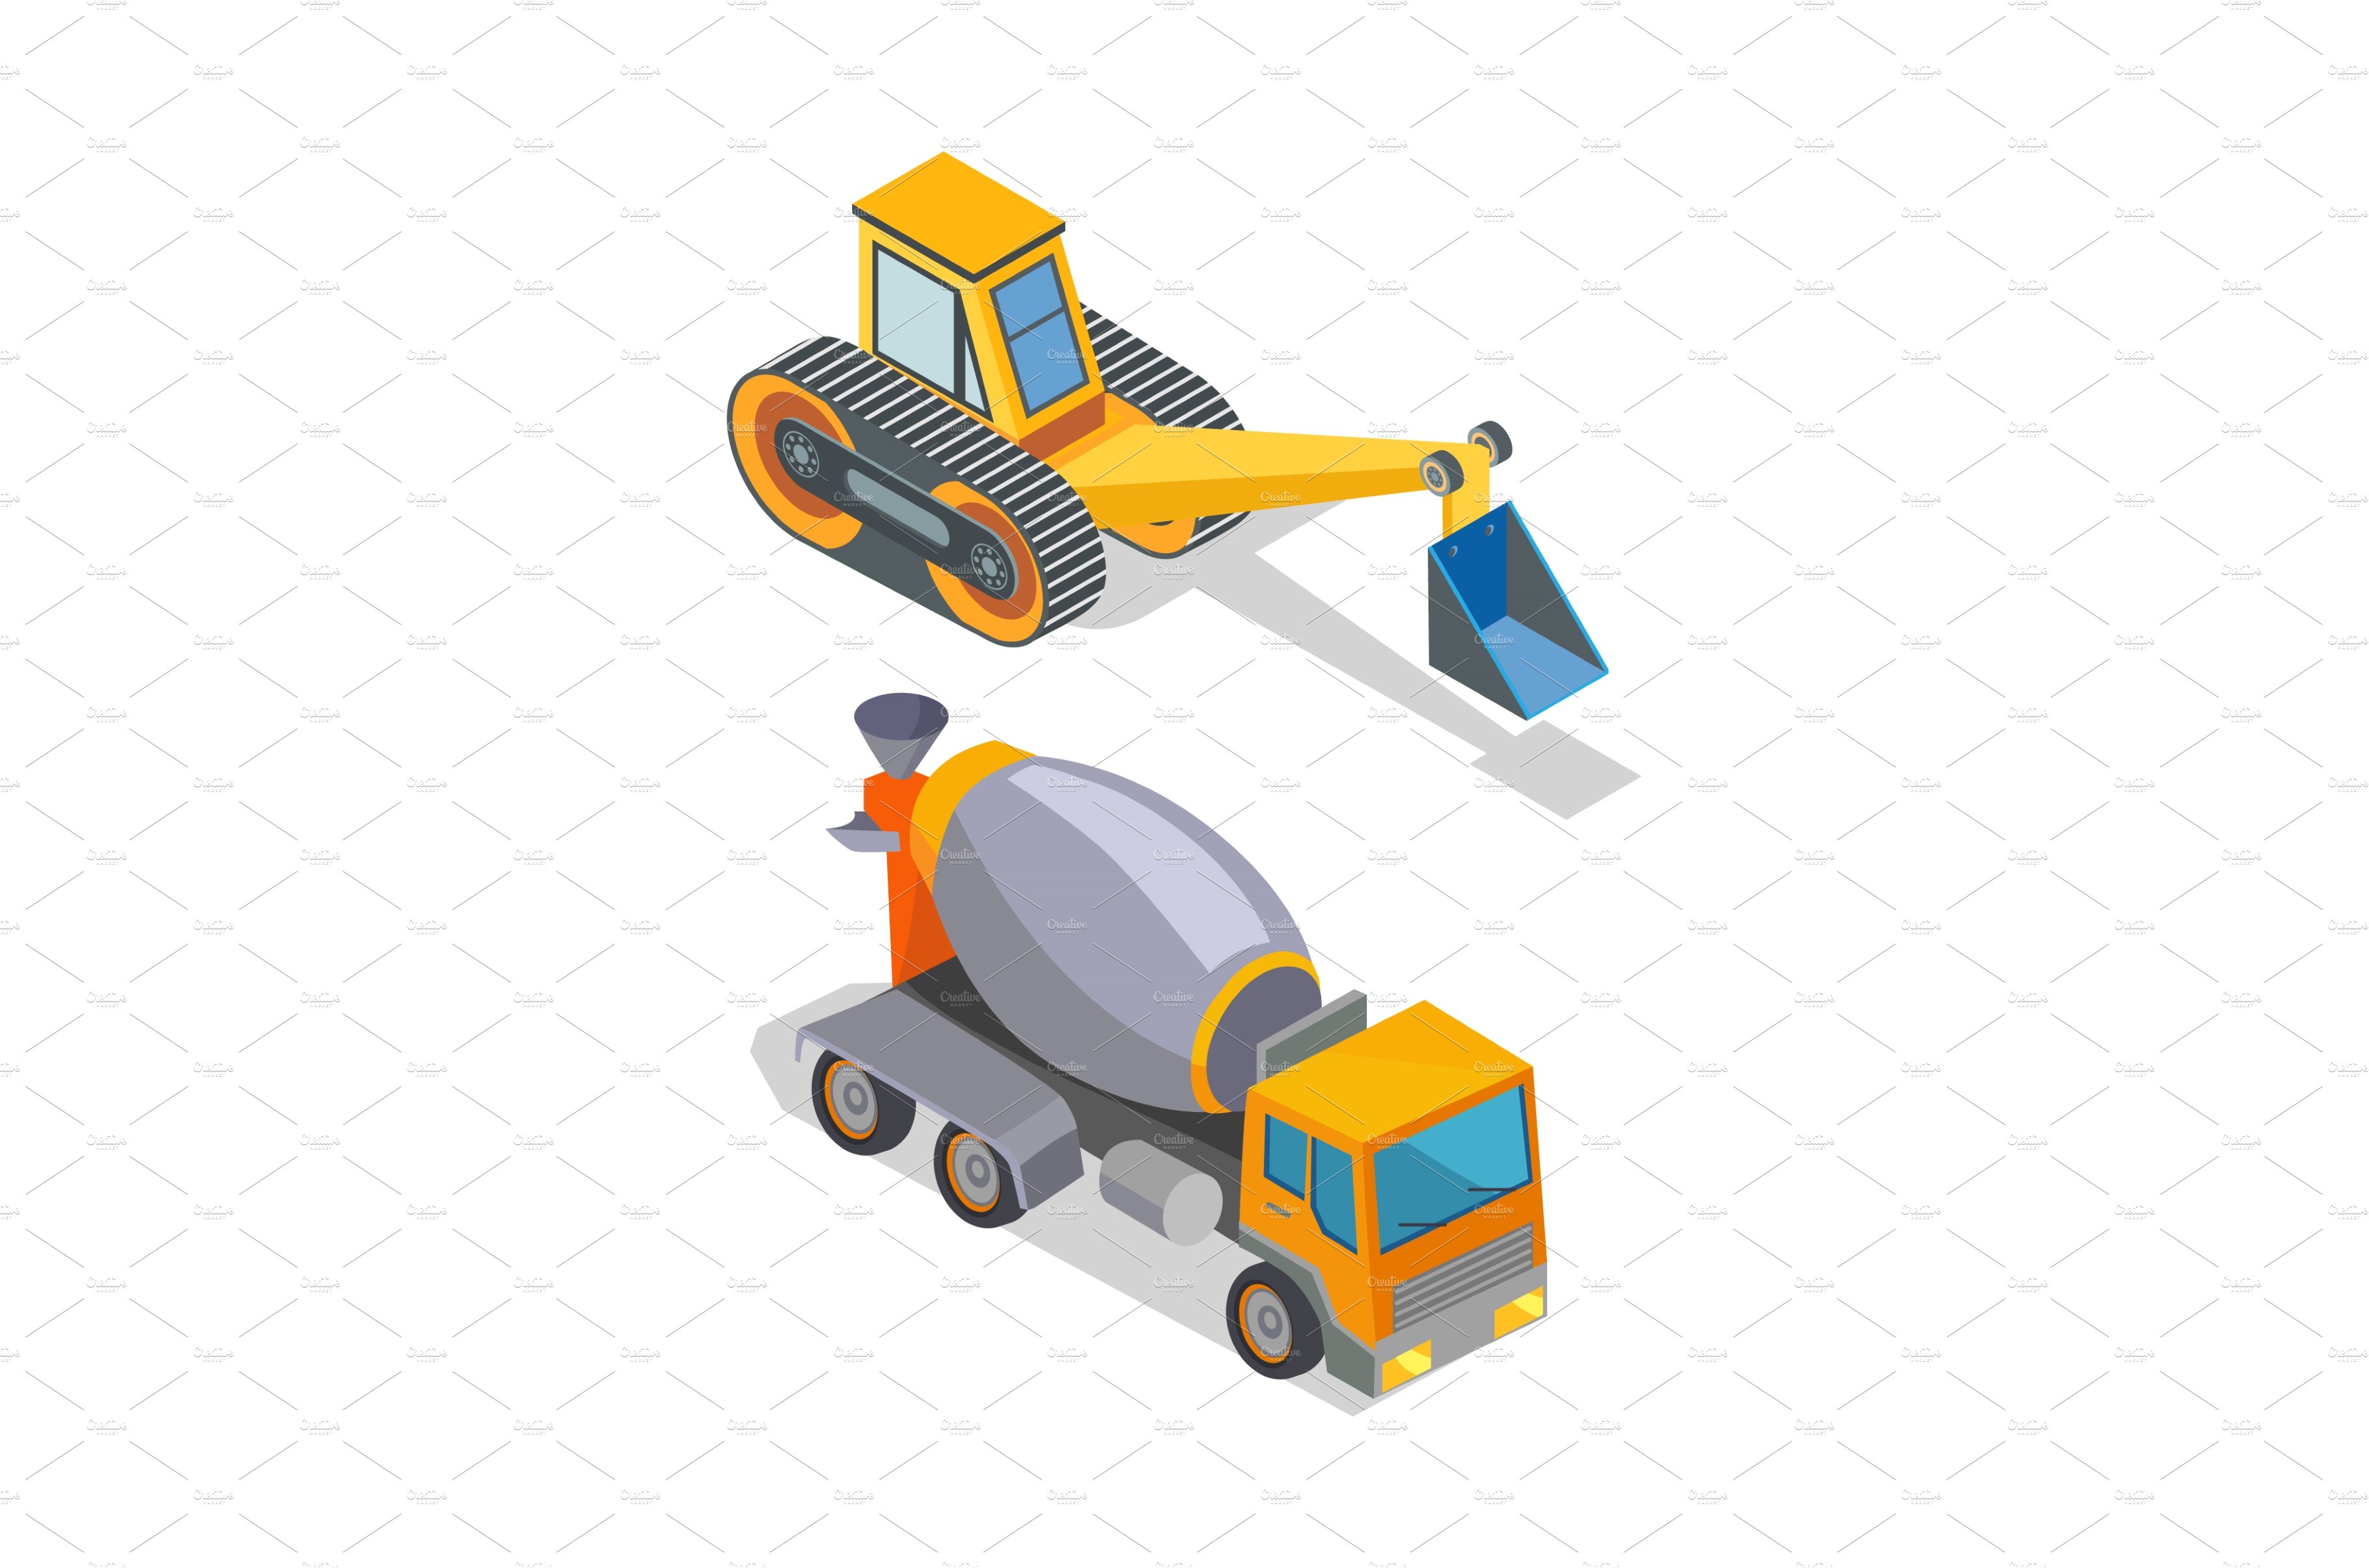 Cement Mixer and Excavator cover image.